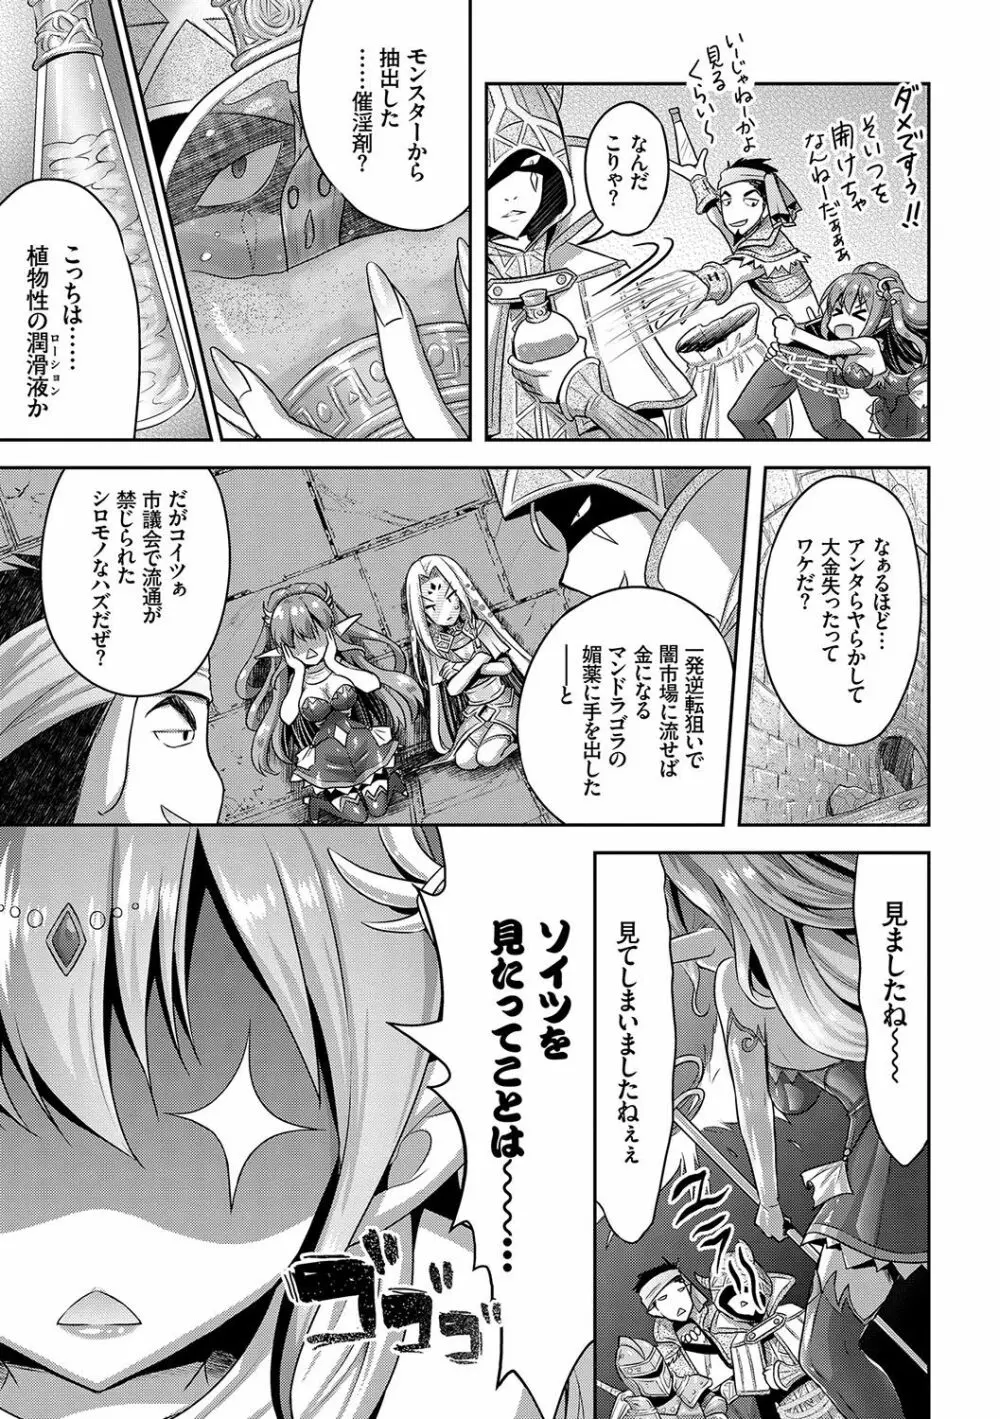 Eat Meat Girl 144ページ